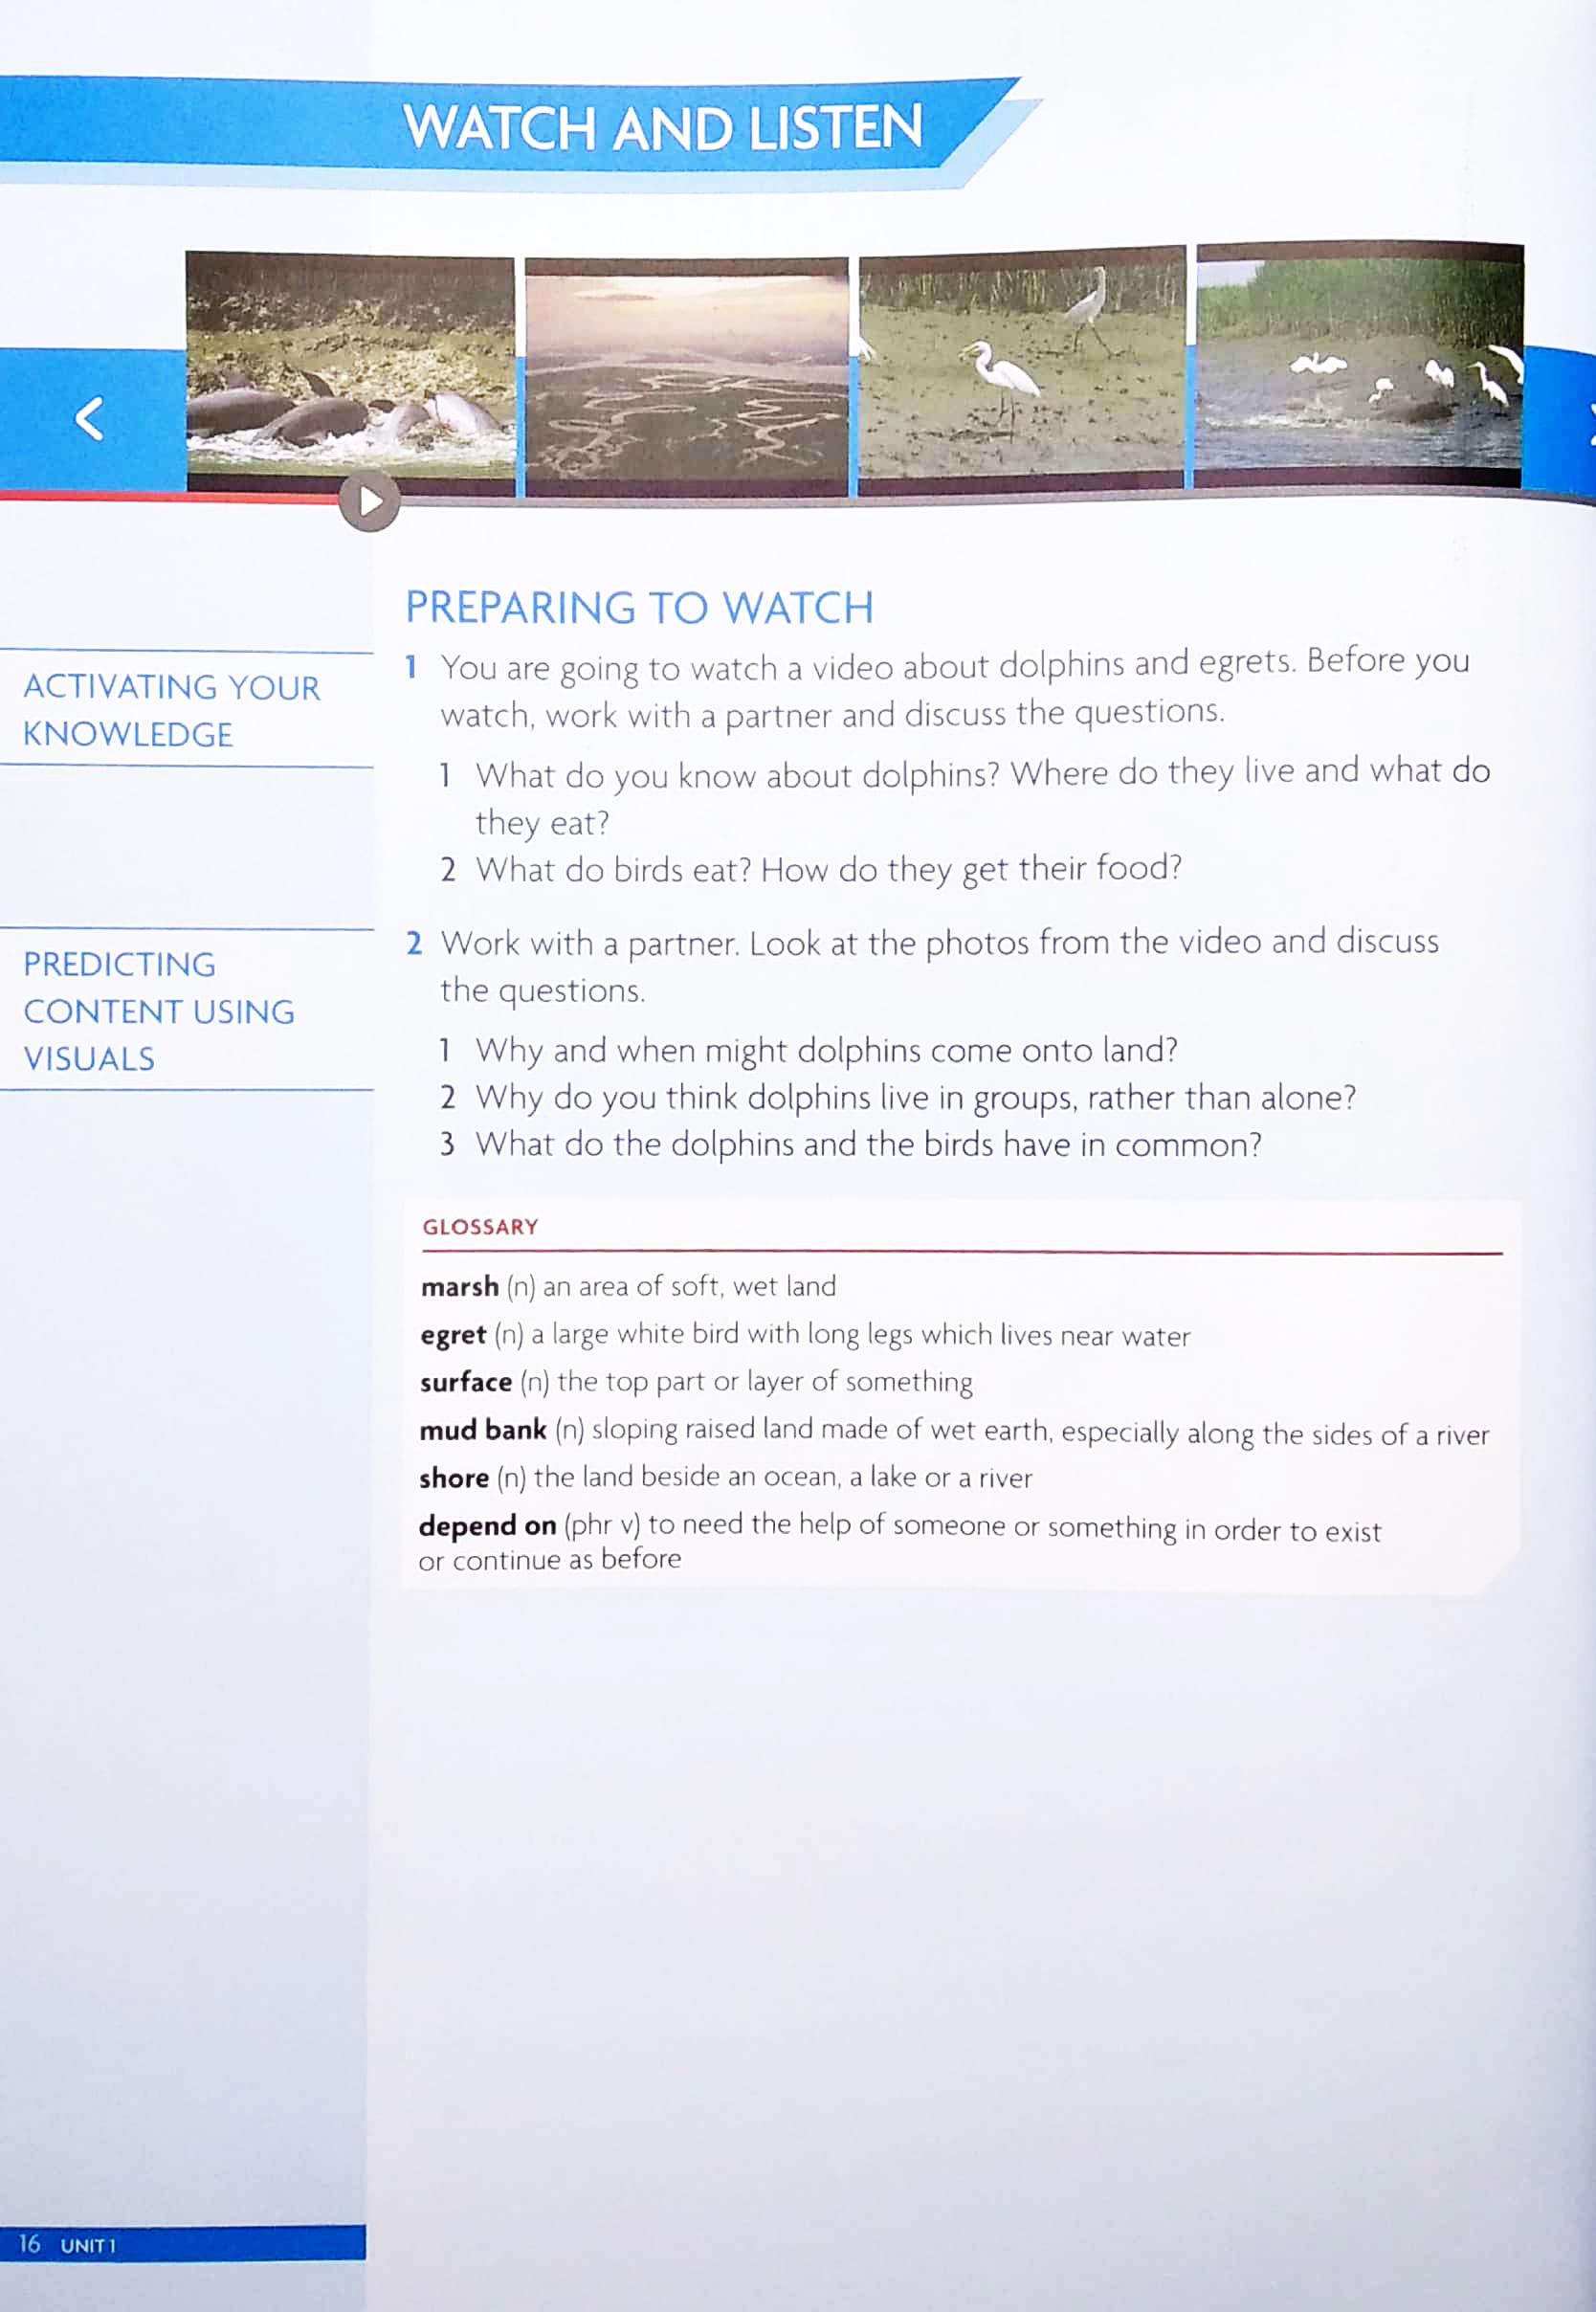 Unlock Level 3 Reading, Writing And Critical Thinking Student's Book With Digital Pack